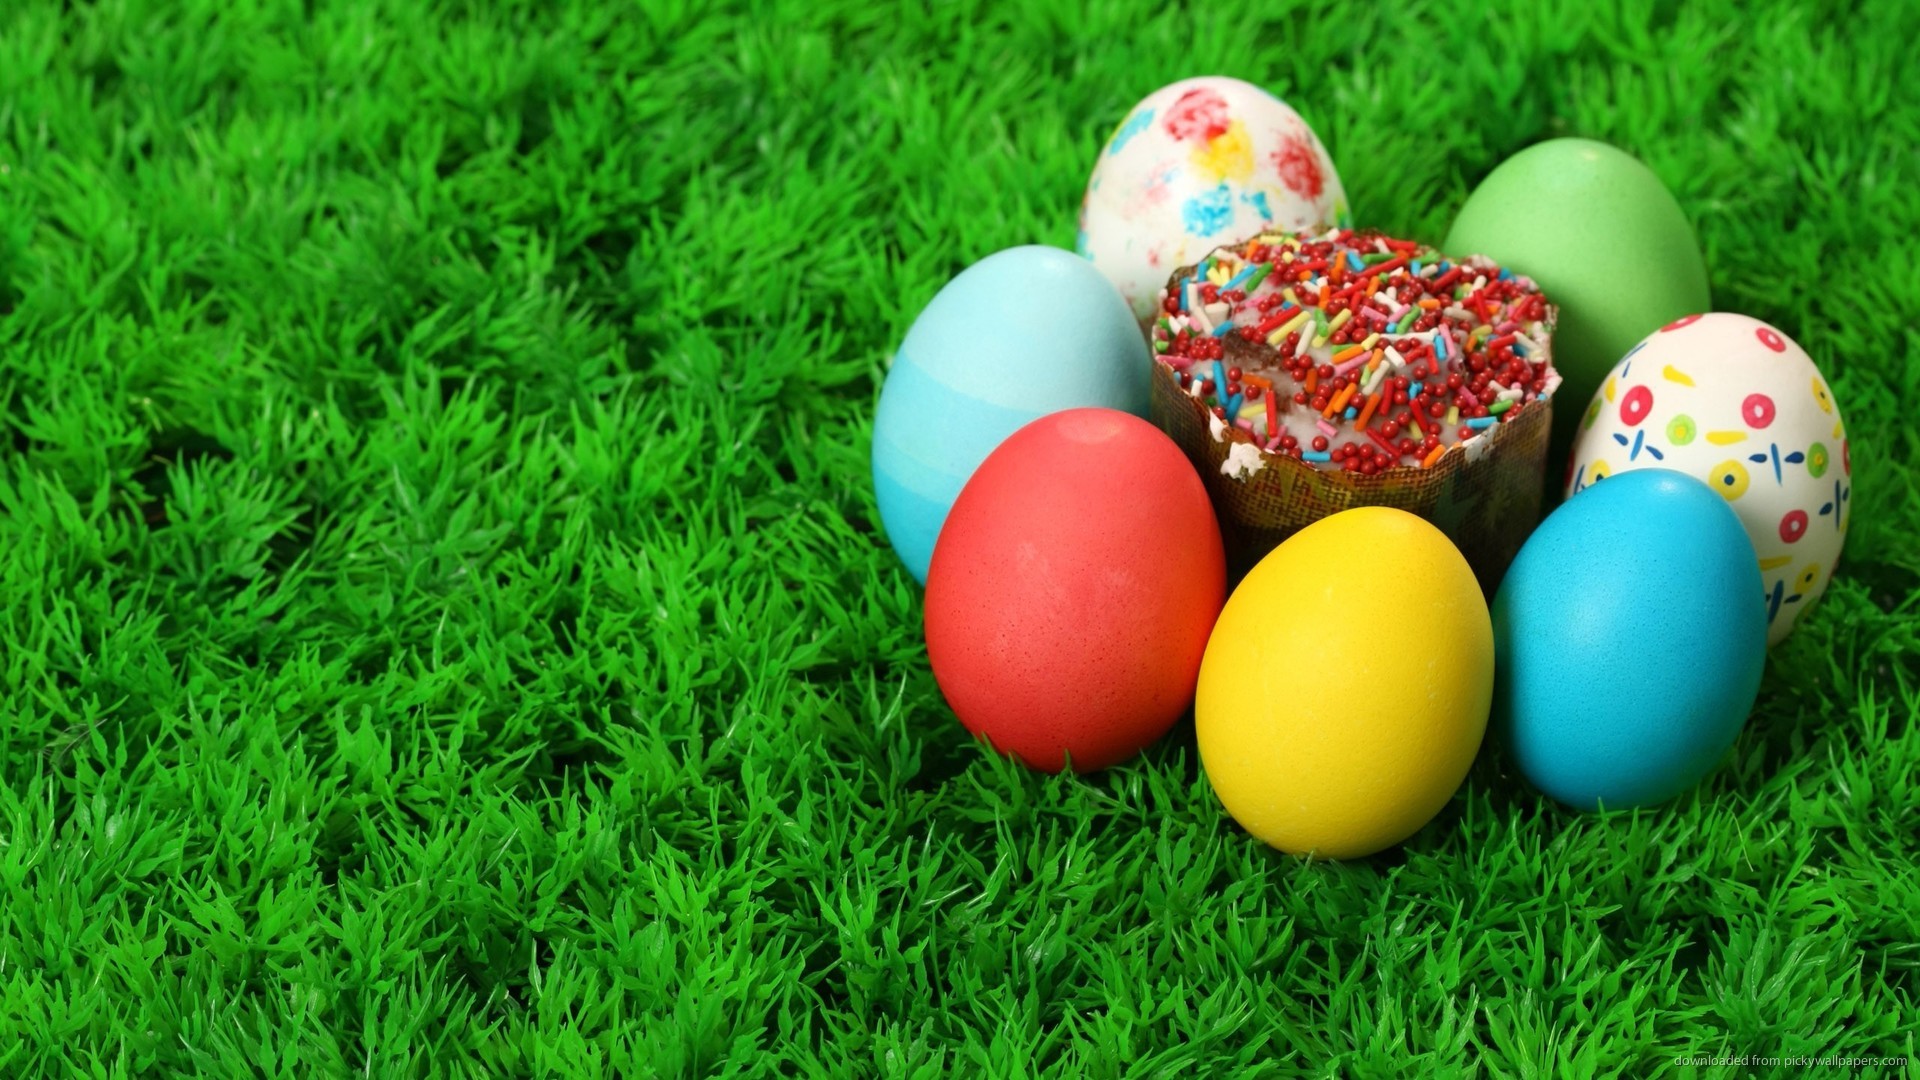 1920x1080 Easter eggs on artificial grass for 